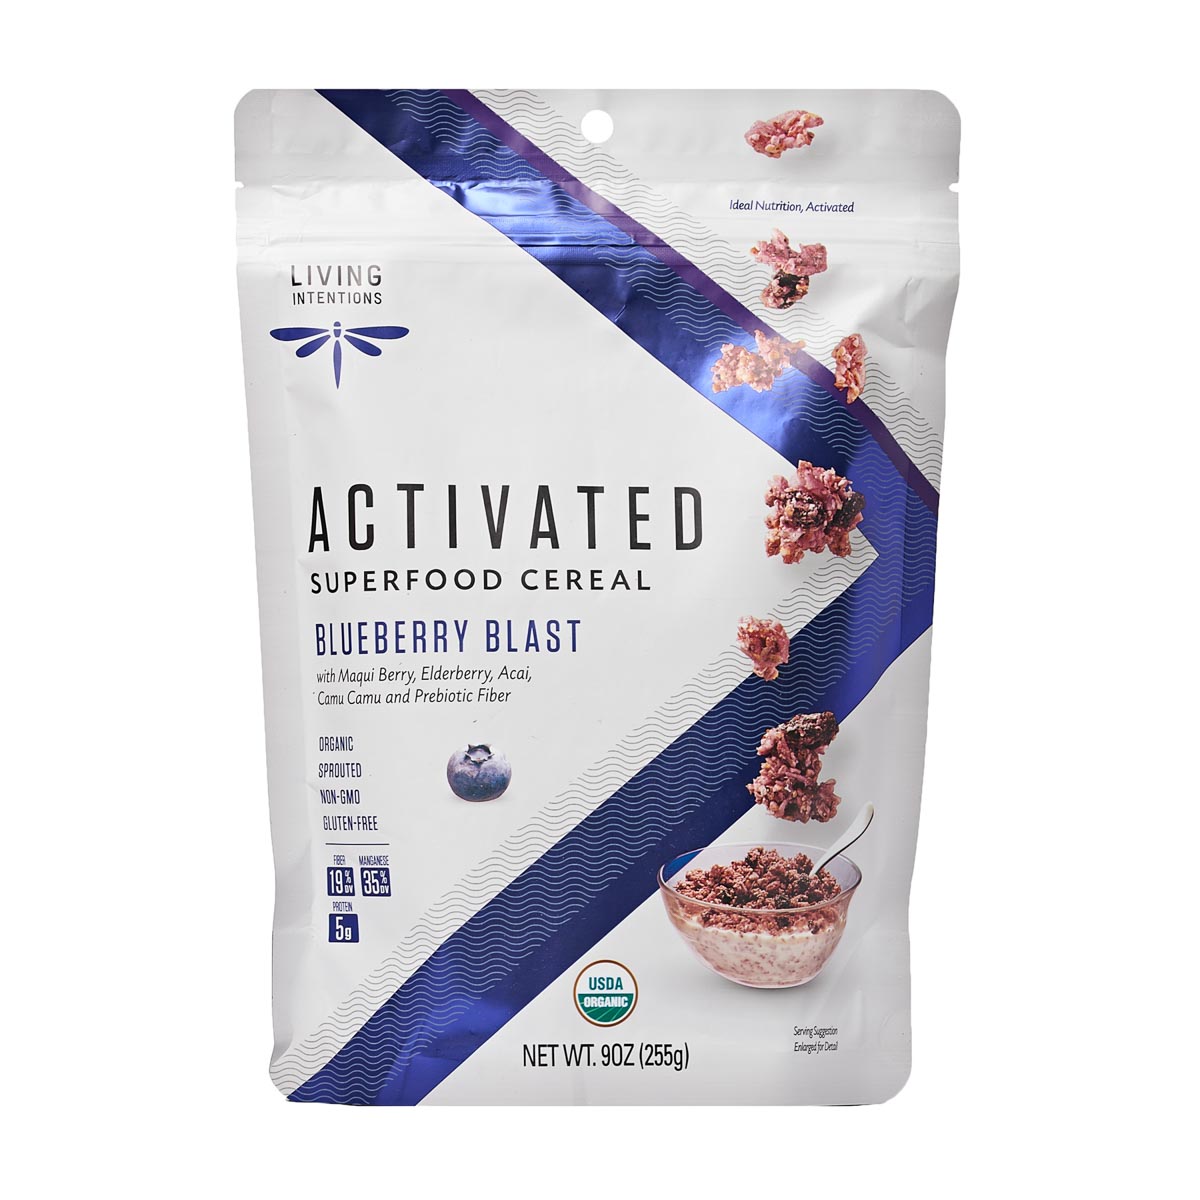 Blueberry Blast Cereal | Living Intentions | Raw Living UK | Raw Foods | Living Intentions Superfood Cereal contains Probiotics, as well as Fresh Blueberries, Currants &amp; Antioxidant-Rich Purple Berries like Acai, Maqui &amp; Elderberry.